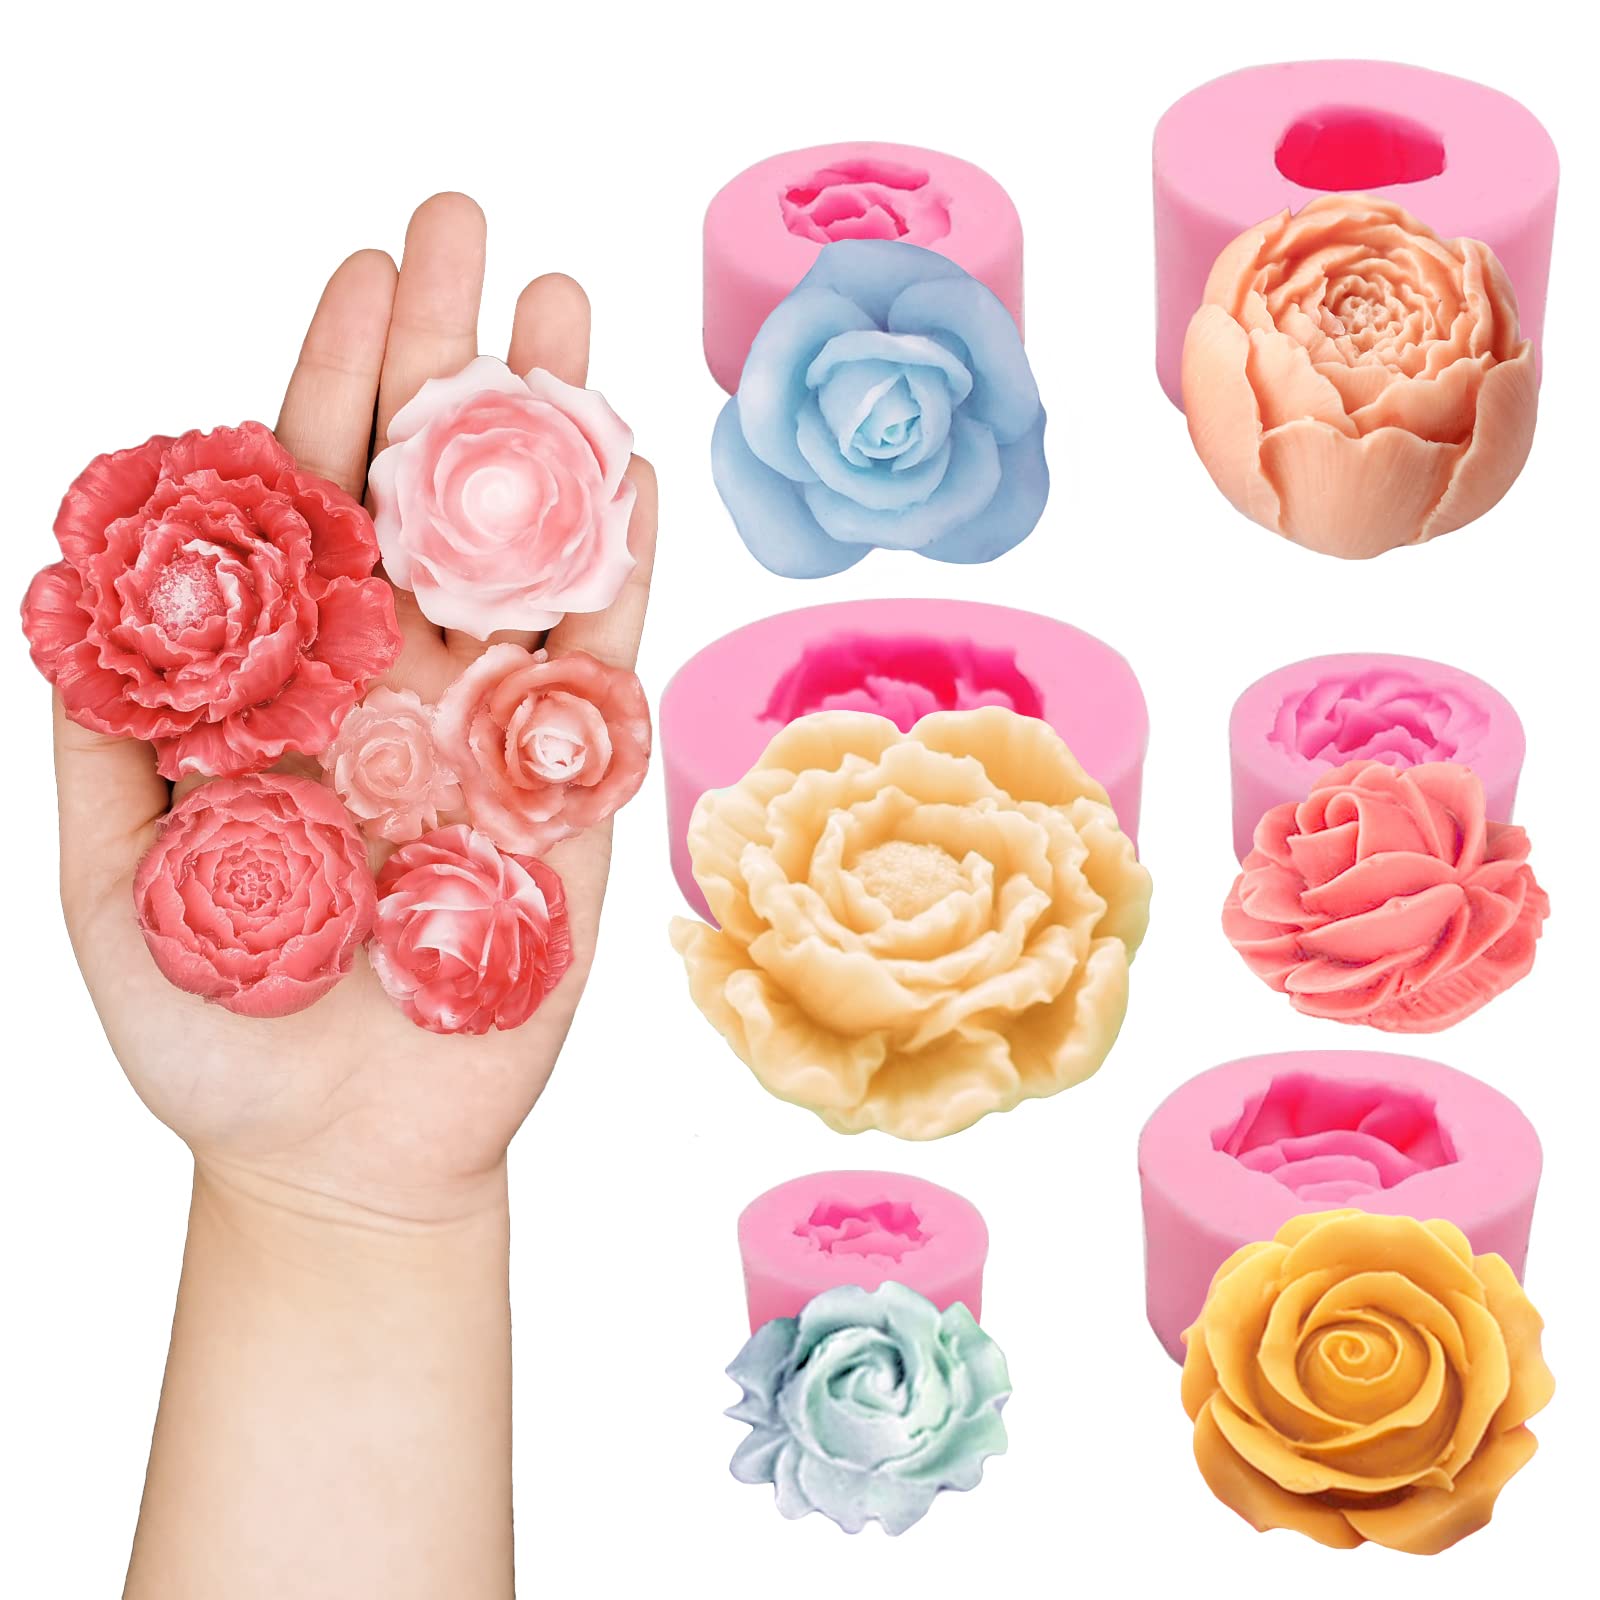 Long Rose Candle Molds,flower Silicone Mold,home Decoration Candle